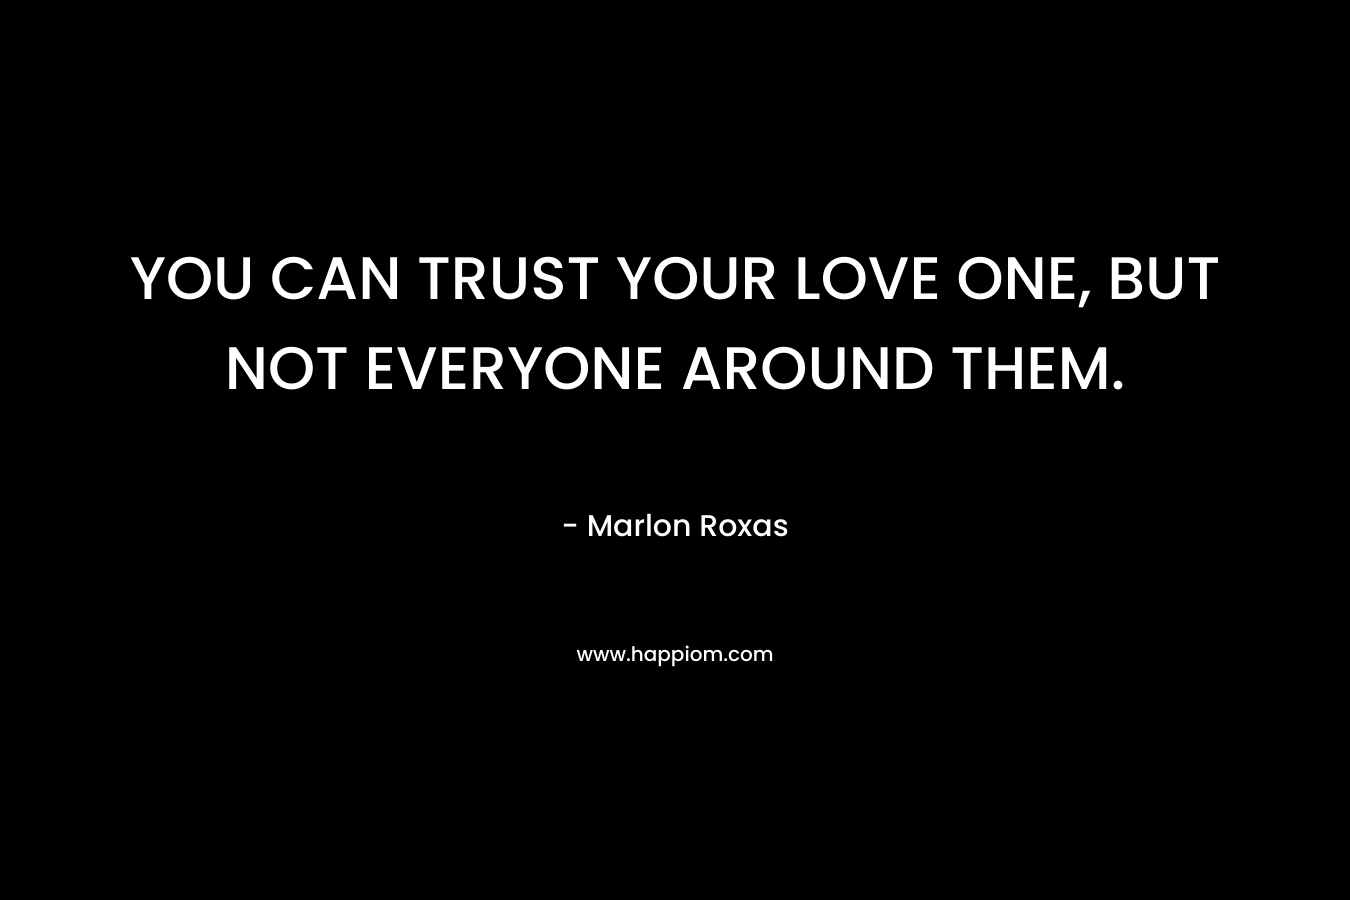 YOU CAN TRUST YOUR LOVE ONE, BUT NOT EVERYONE AROUND THEM.